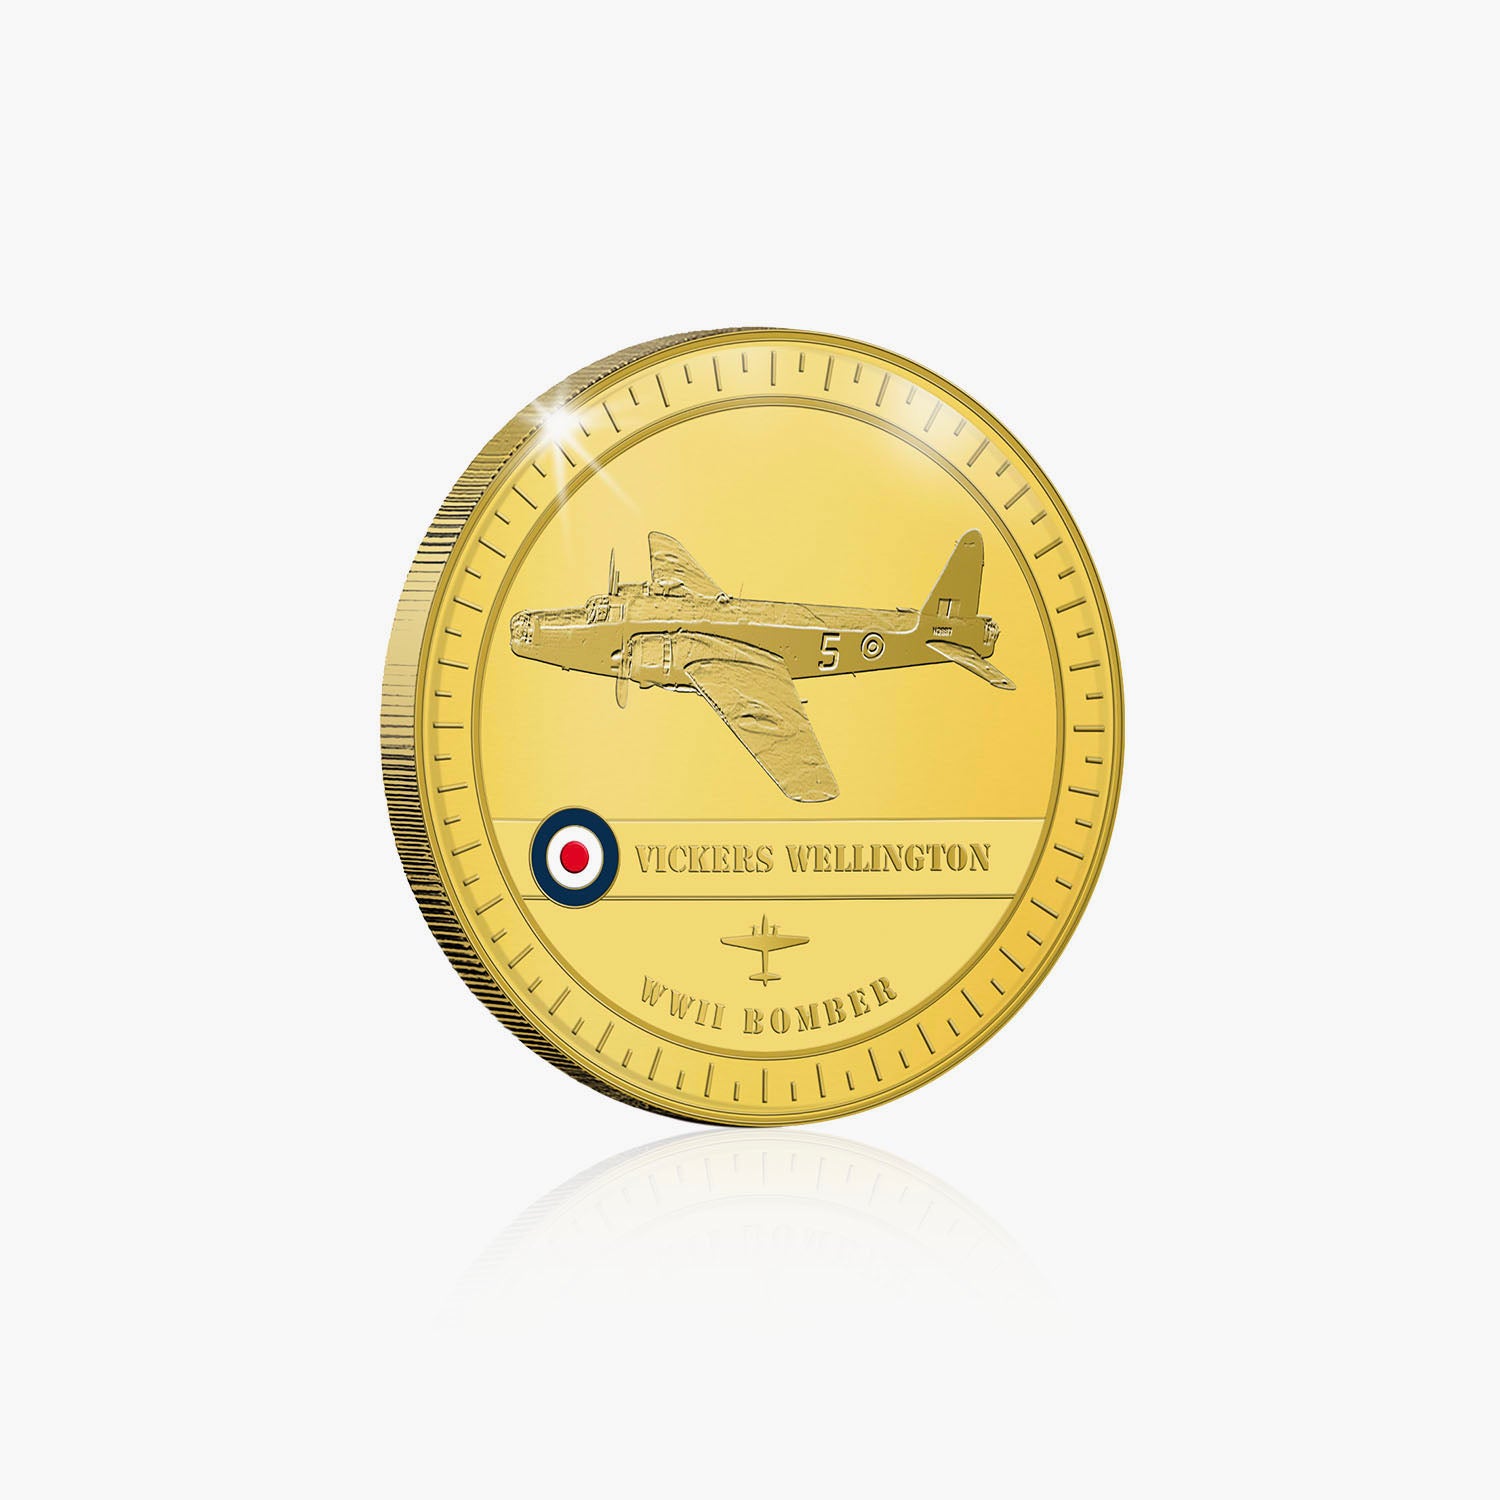 Vickers Wellington Gold-Plated Commemorative